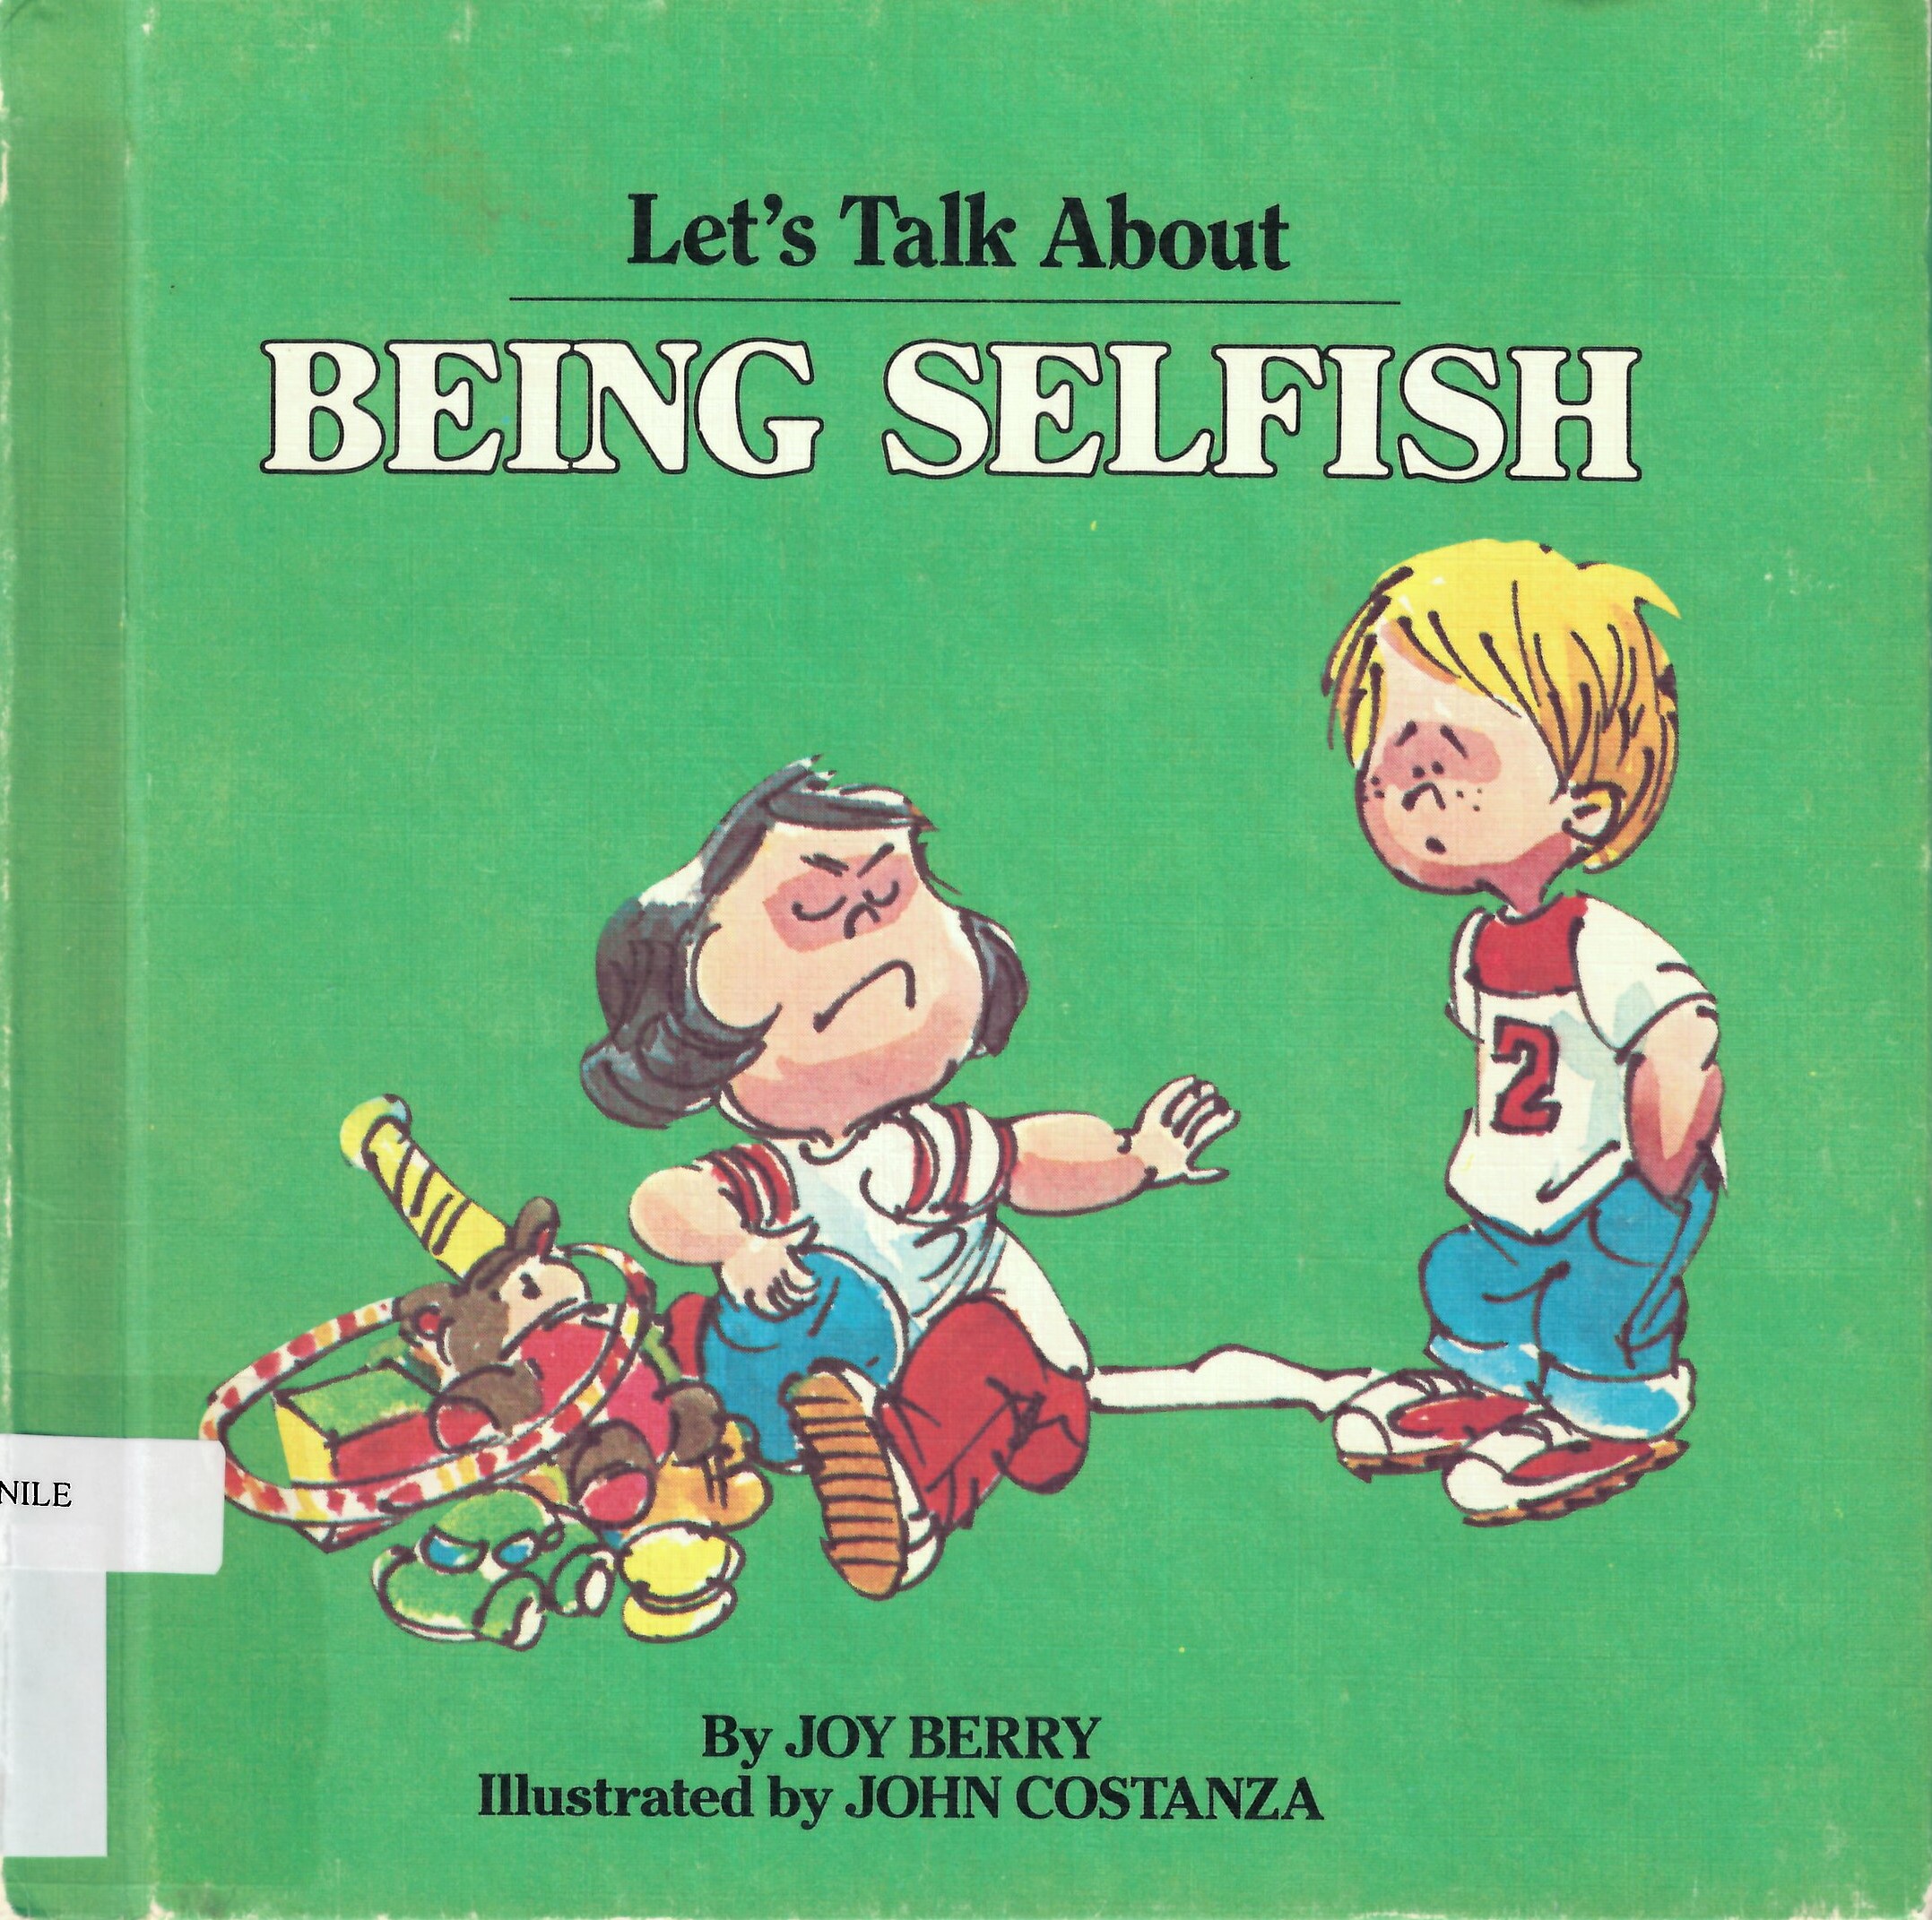 Let's talk about being selfish